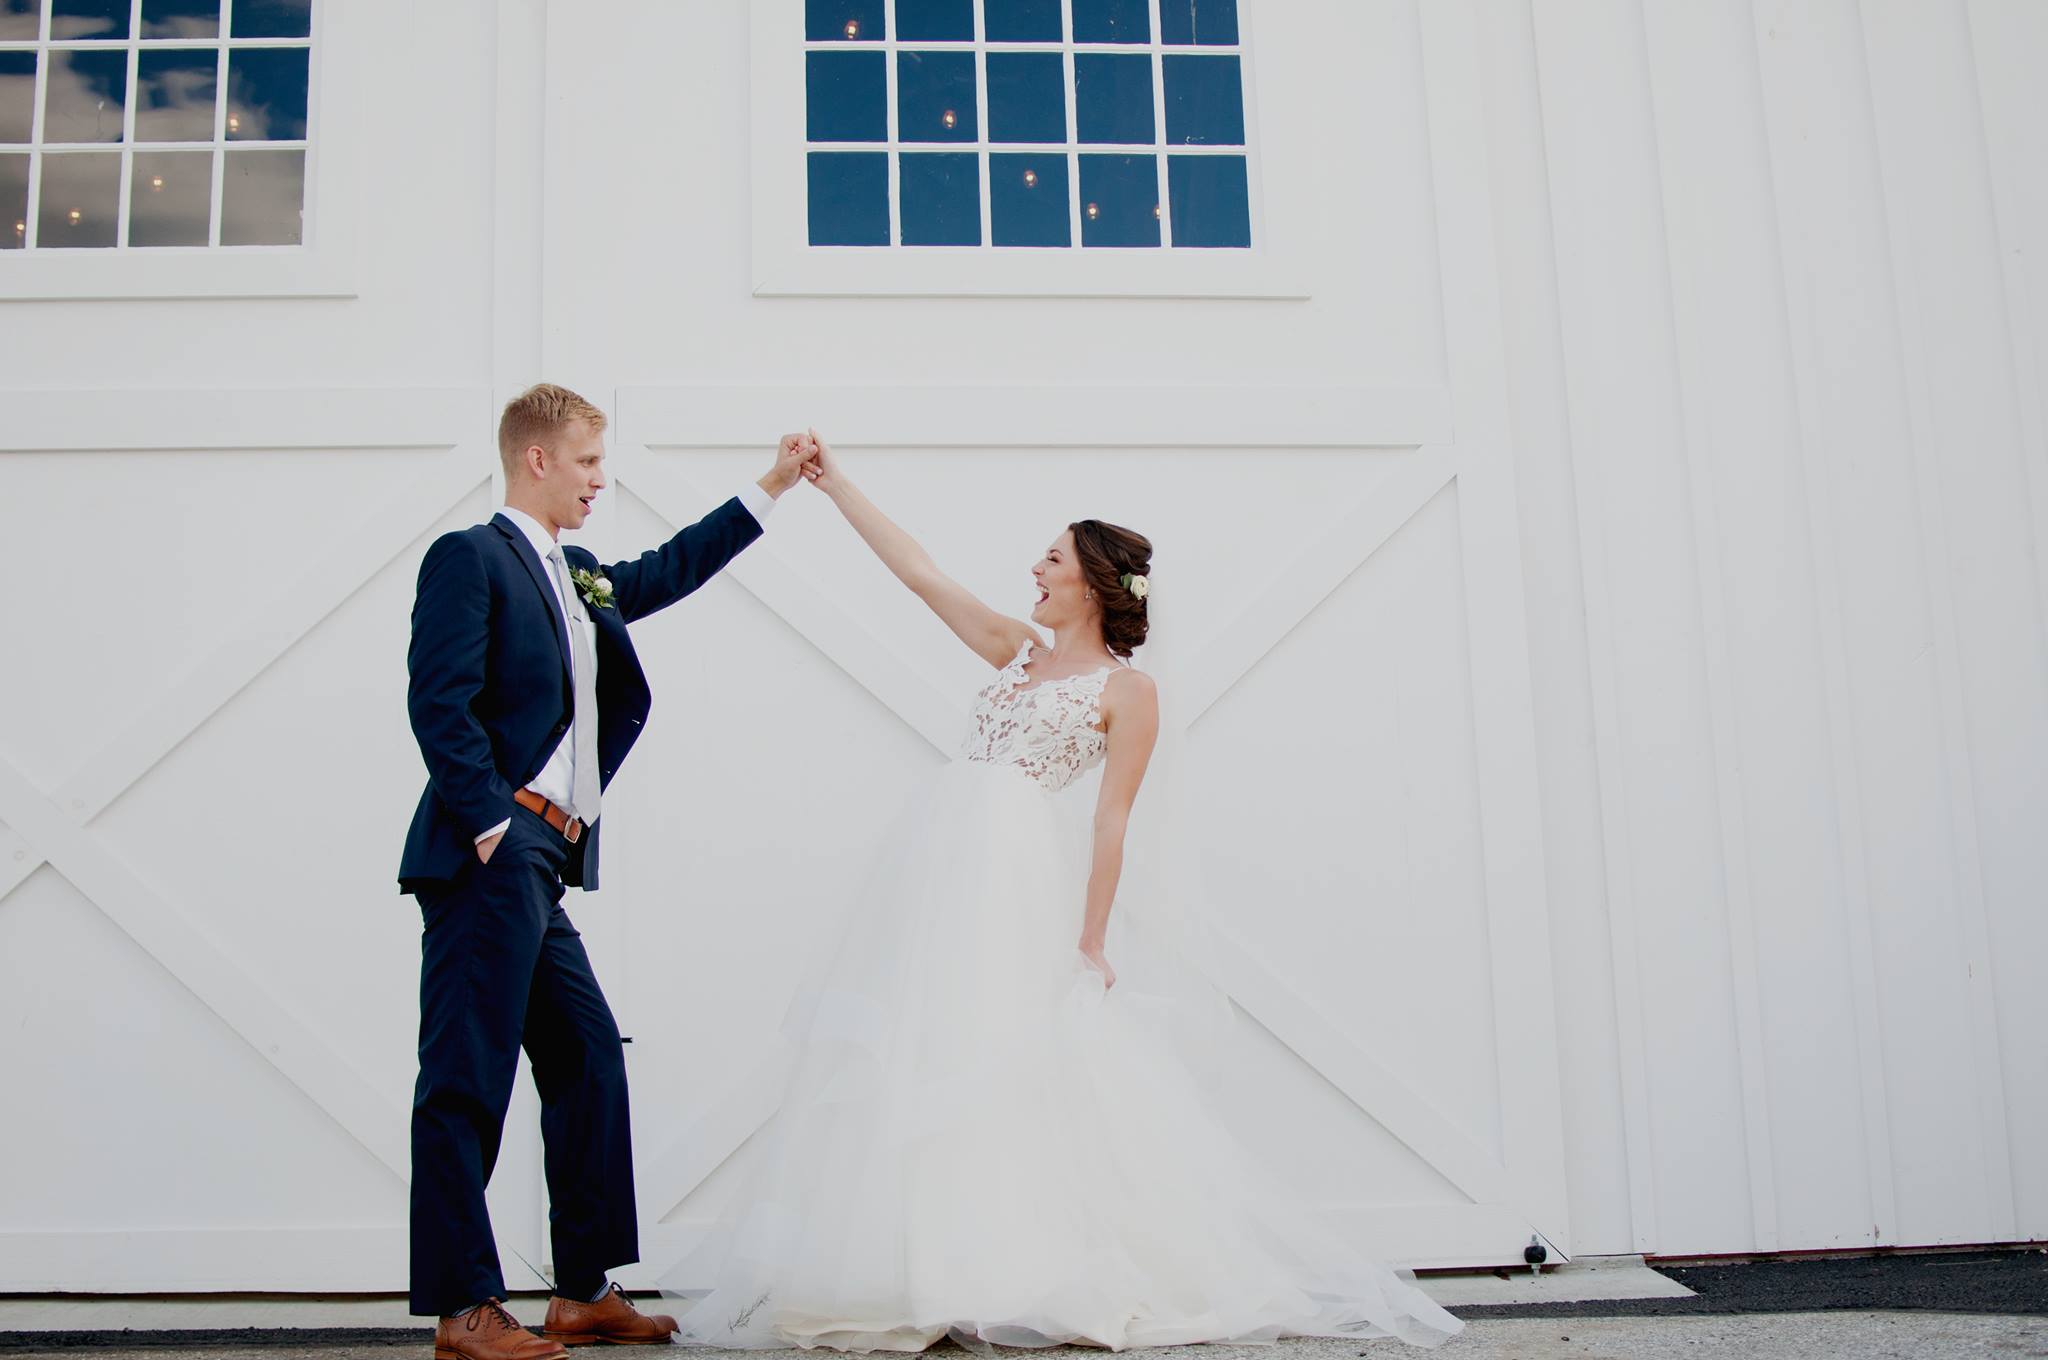 eric and missy dancing with barn door color.jpg